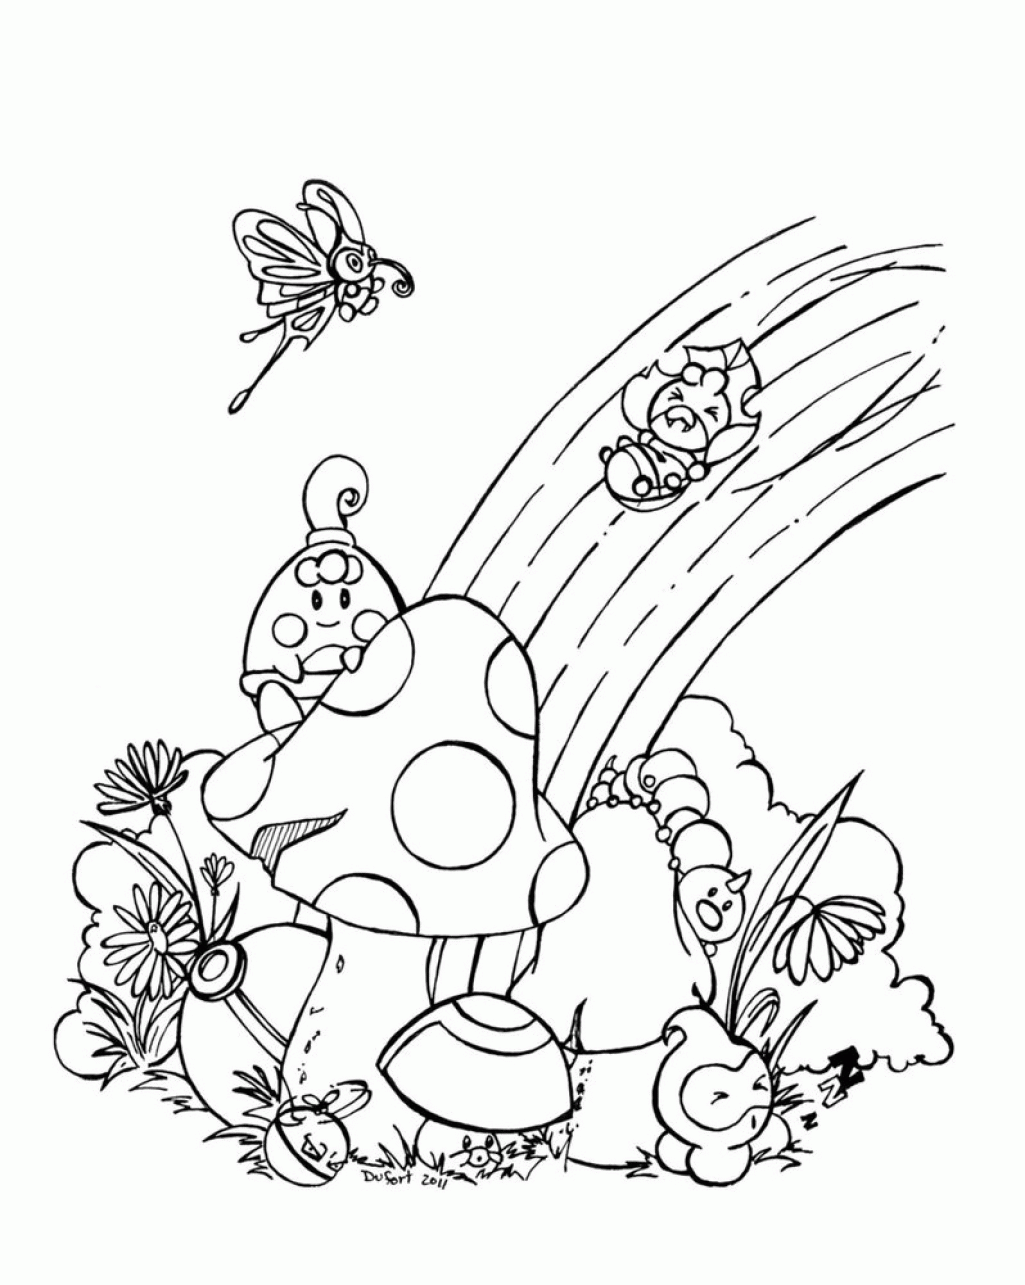 Rainbow Coloring Page Printable Coloring Pages Rainbow Free ...